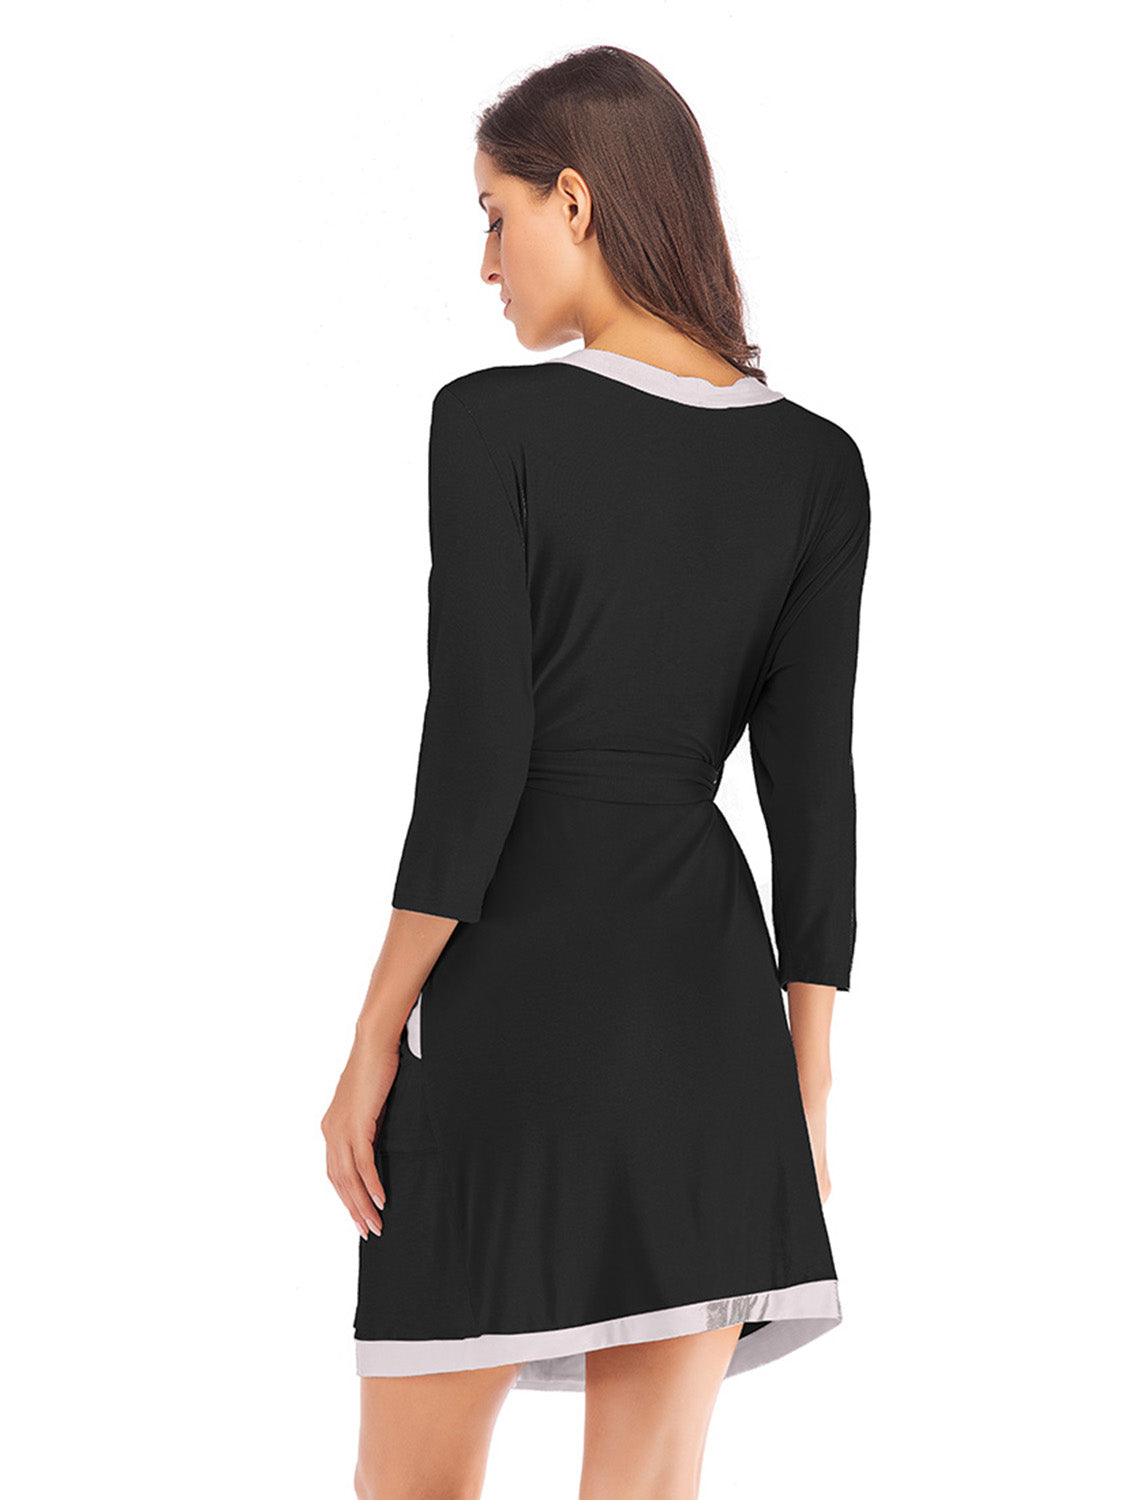 Tie Waist Surplice Neck Robe with Pockets - Tophatter Deals and Online Shopping - Electronics, Jewelry, Beauty, Health, Gadgets, Fashion - Tophatter's Discounts & Offers - tophatters - tophatters.co